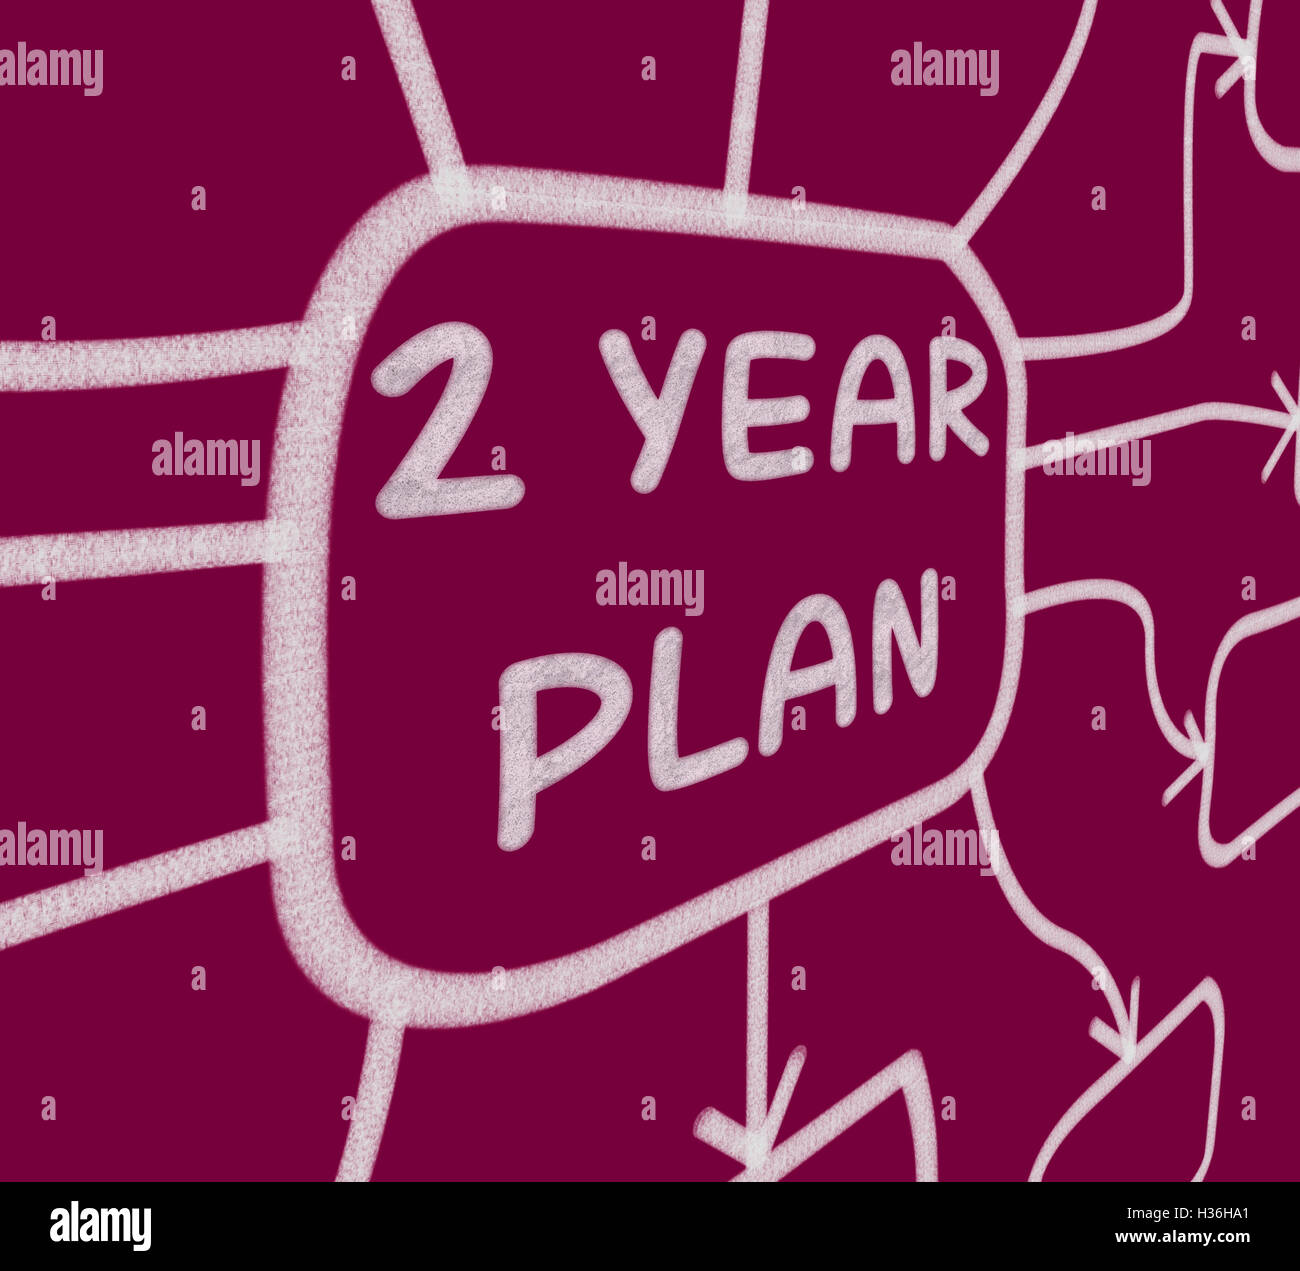 Two Year Plan Diagram Means 2 Year Planning Stock Photo